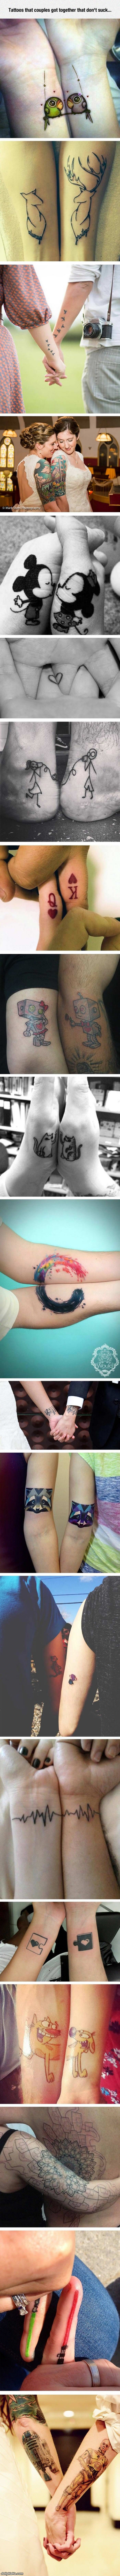 some couples tattoos funny picture